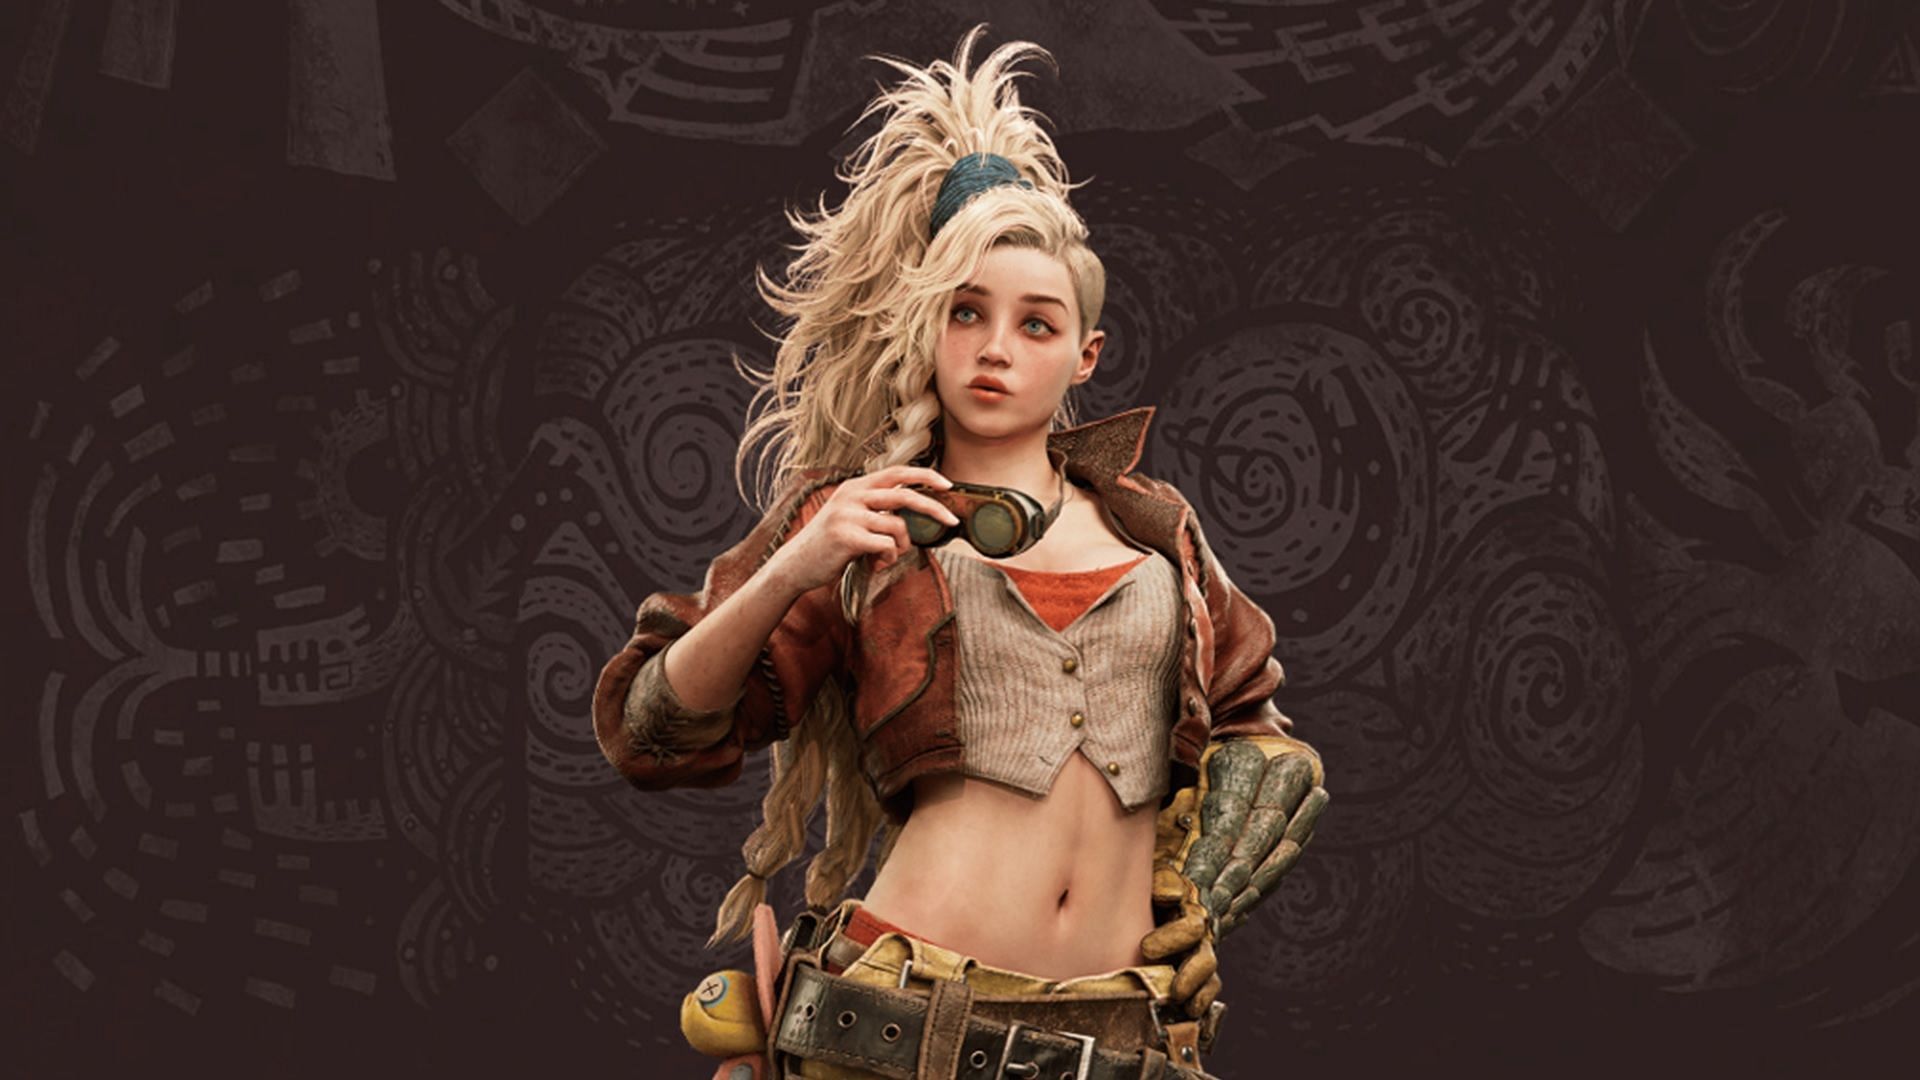 Monster Hunter Wilds has been tagged as a Dating Sim by fans who are in awe of Gemma the Smithy, a character in the game